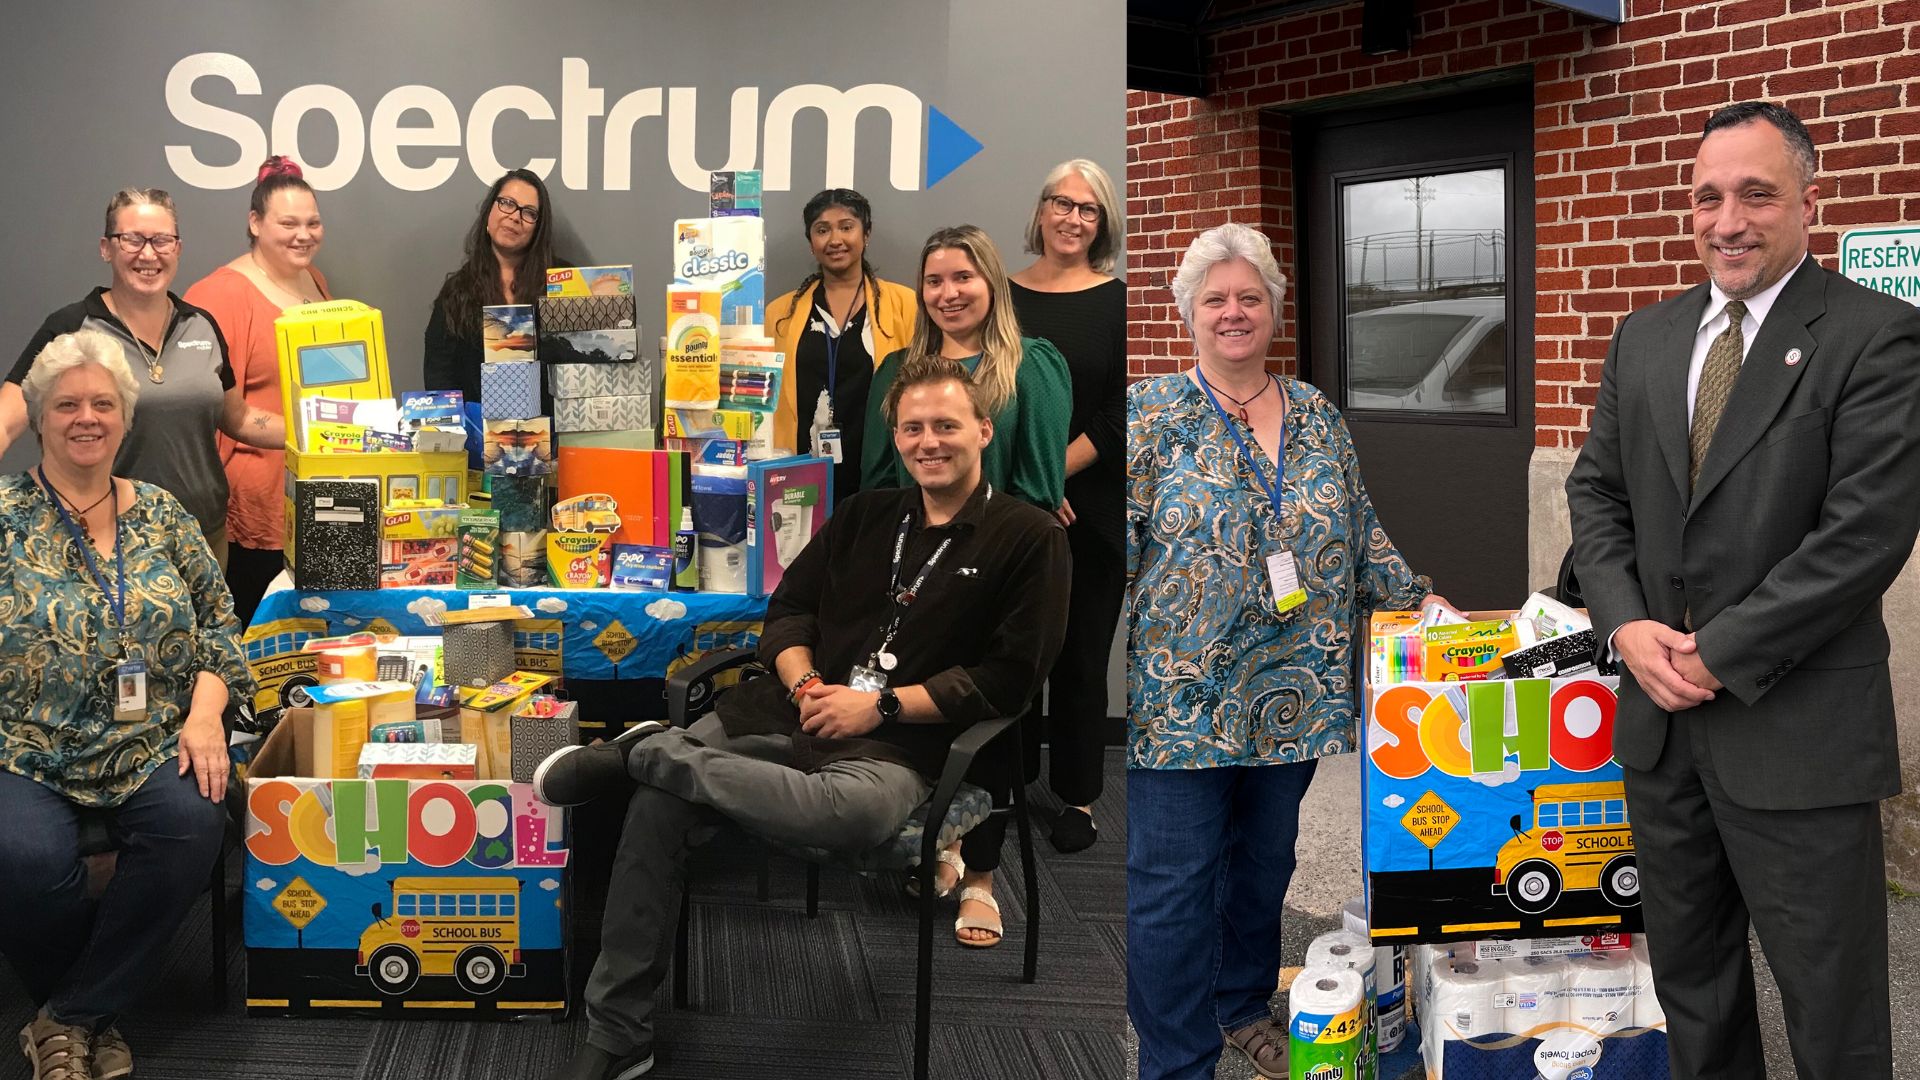 Employees from the HR department and Spirit Committee at Spectrum in Schenectady collected and donated school supplies to our elementary school students. District Director of Elementary Schools Joe DiCaprio accepted the donation from Spectrum employee, Deb Rust.